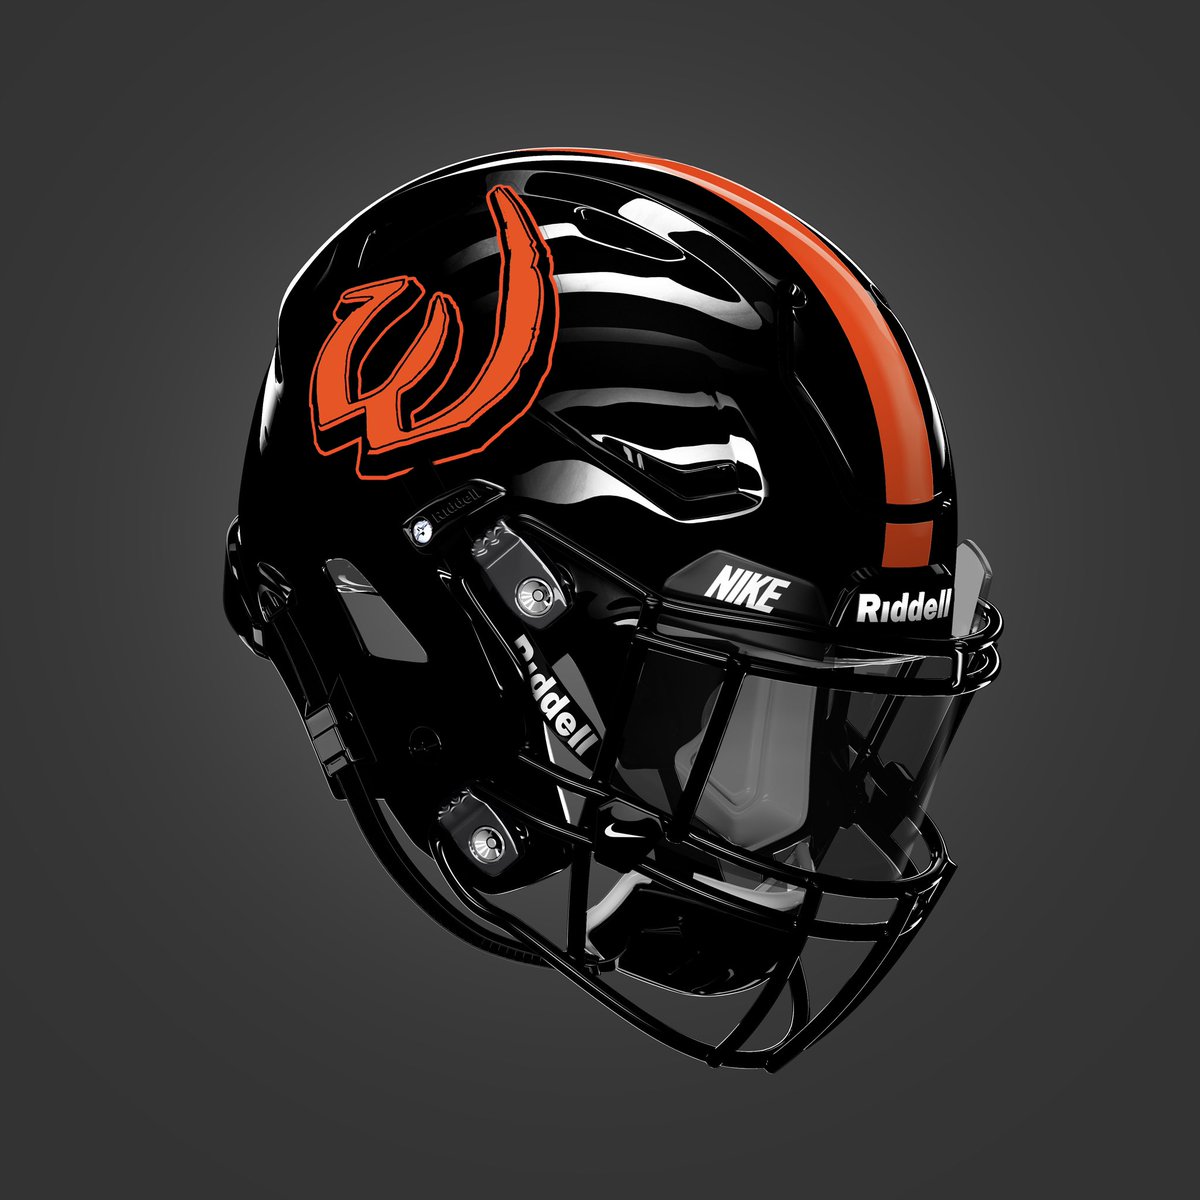 Black shell + black mask + orange stripe + orange W = Tough 😤. And Lincoln-Way West has been tough this yr, going 9-2 and making the quarters for the first time since 2017. The #12 Warriors get a home matchup with #13 Downers Grove North at 2:00 on Saturday in the 7A bracket.